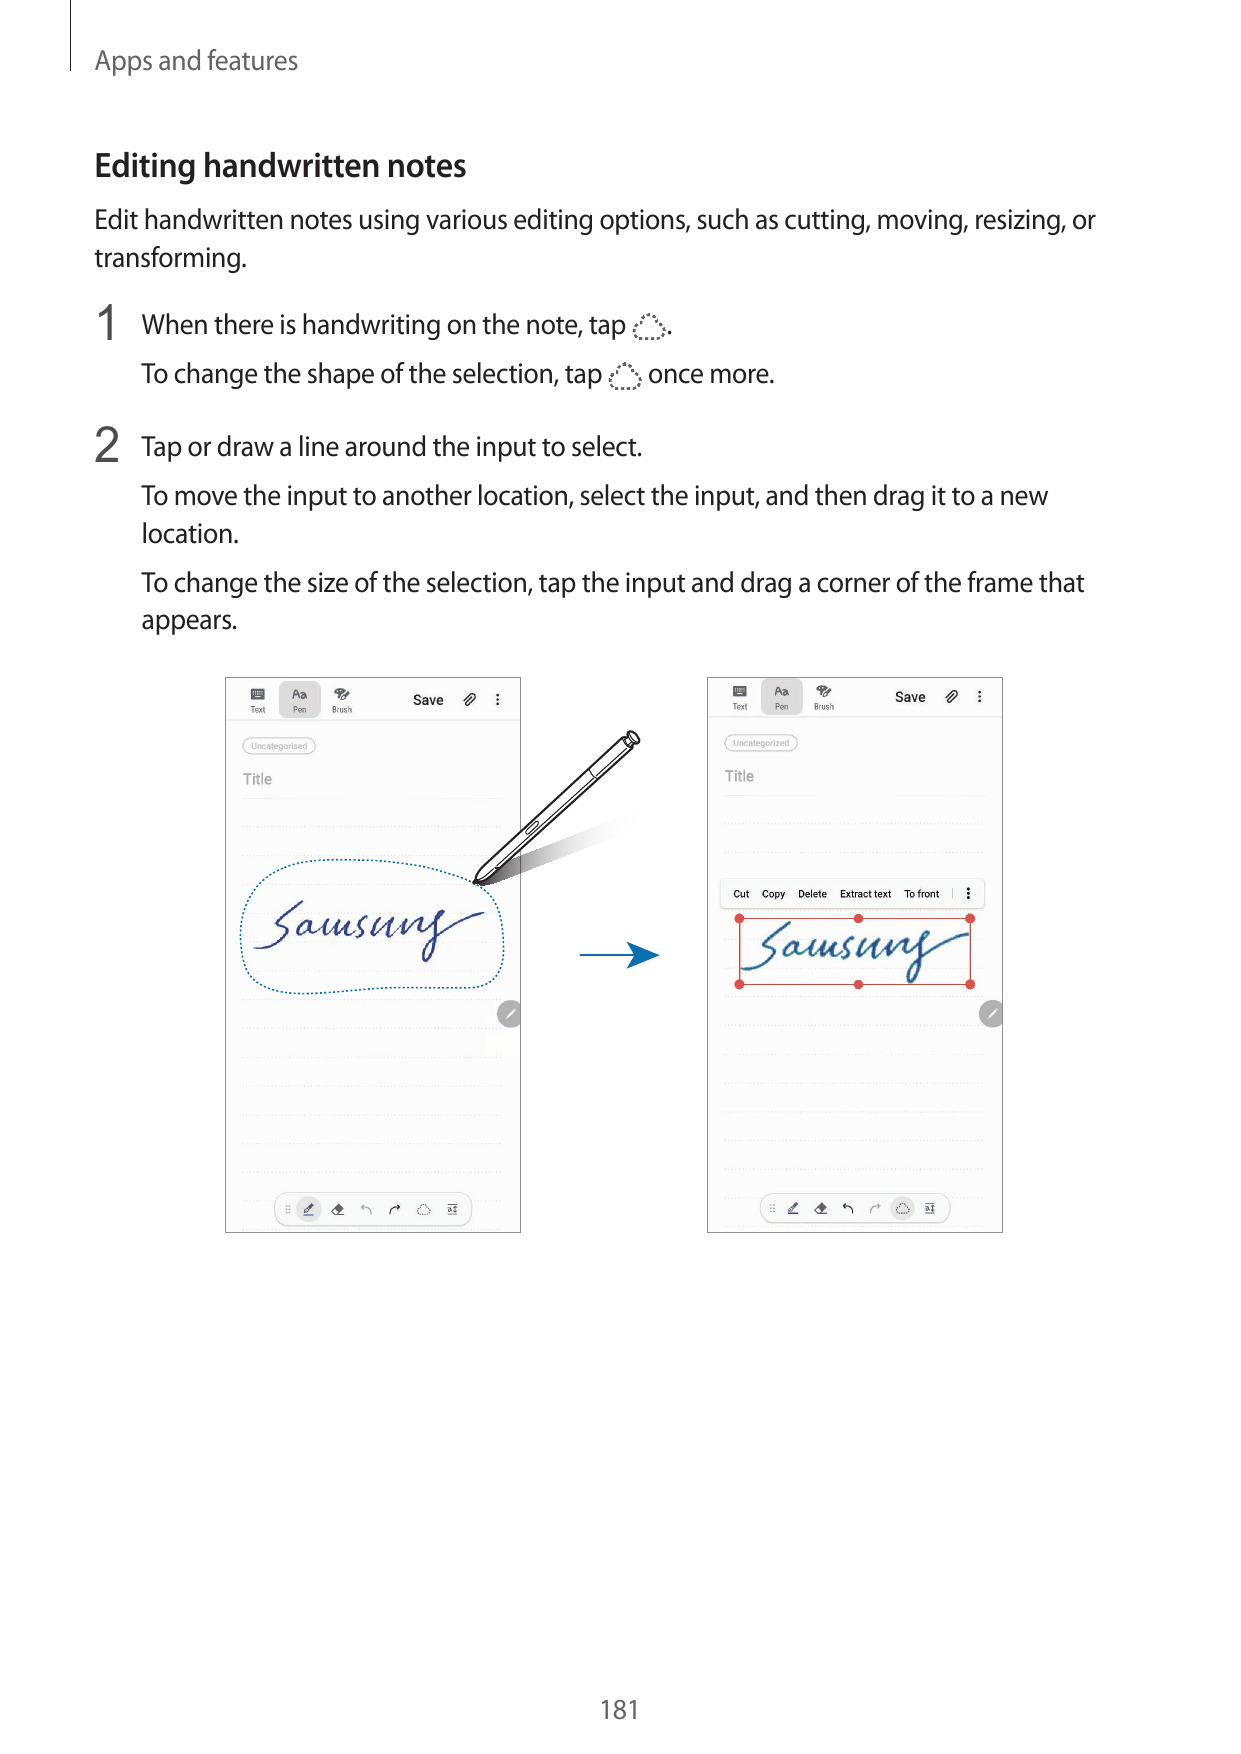 Apps and featuresEditing handwritten notesEdit handwritten notes using various editing options, such as cutting, moving, resizin